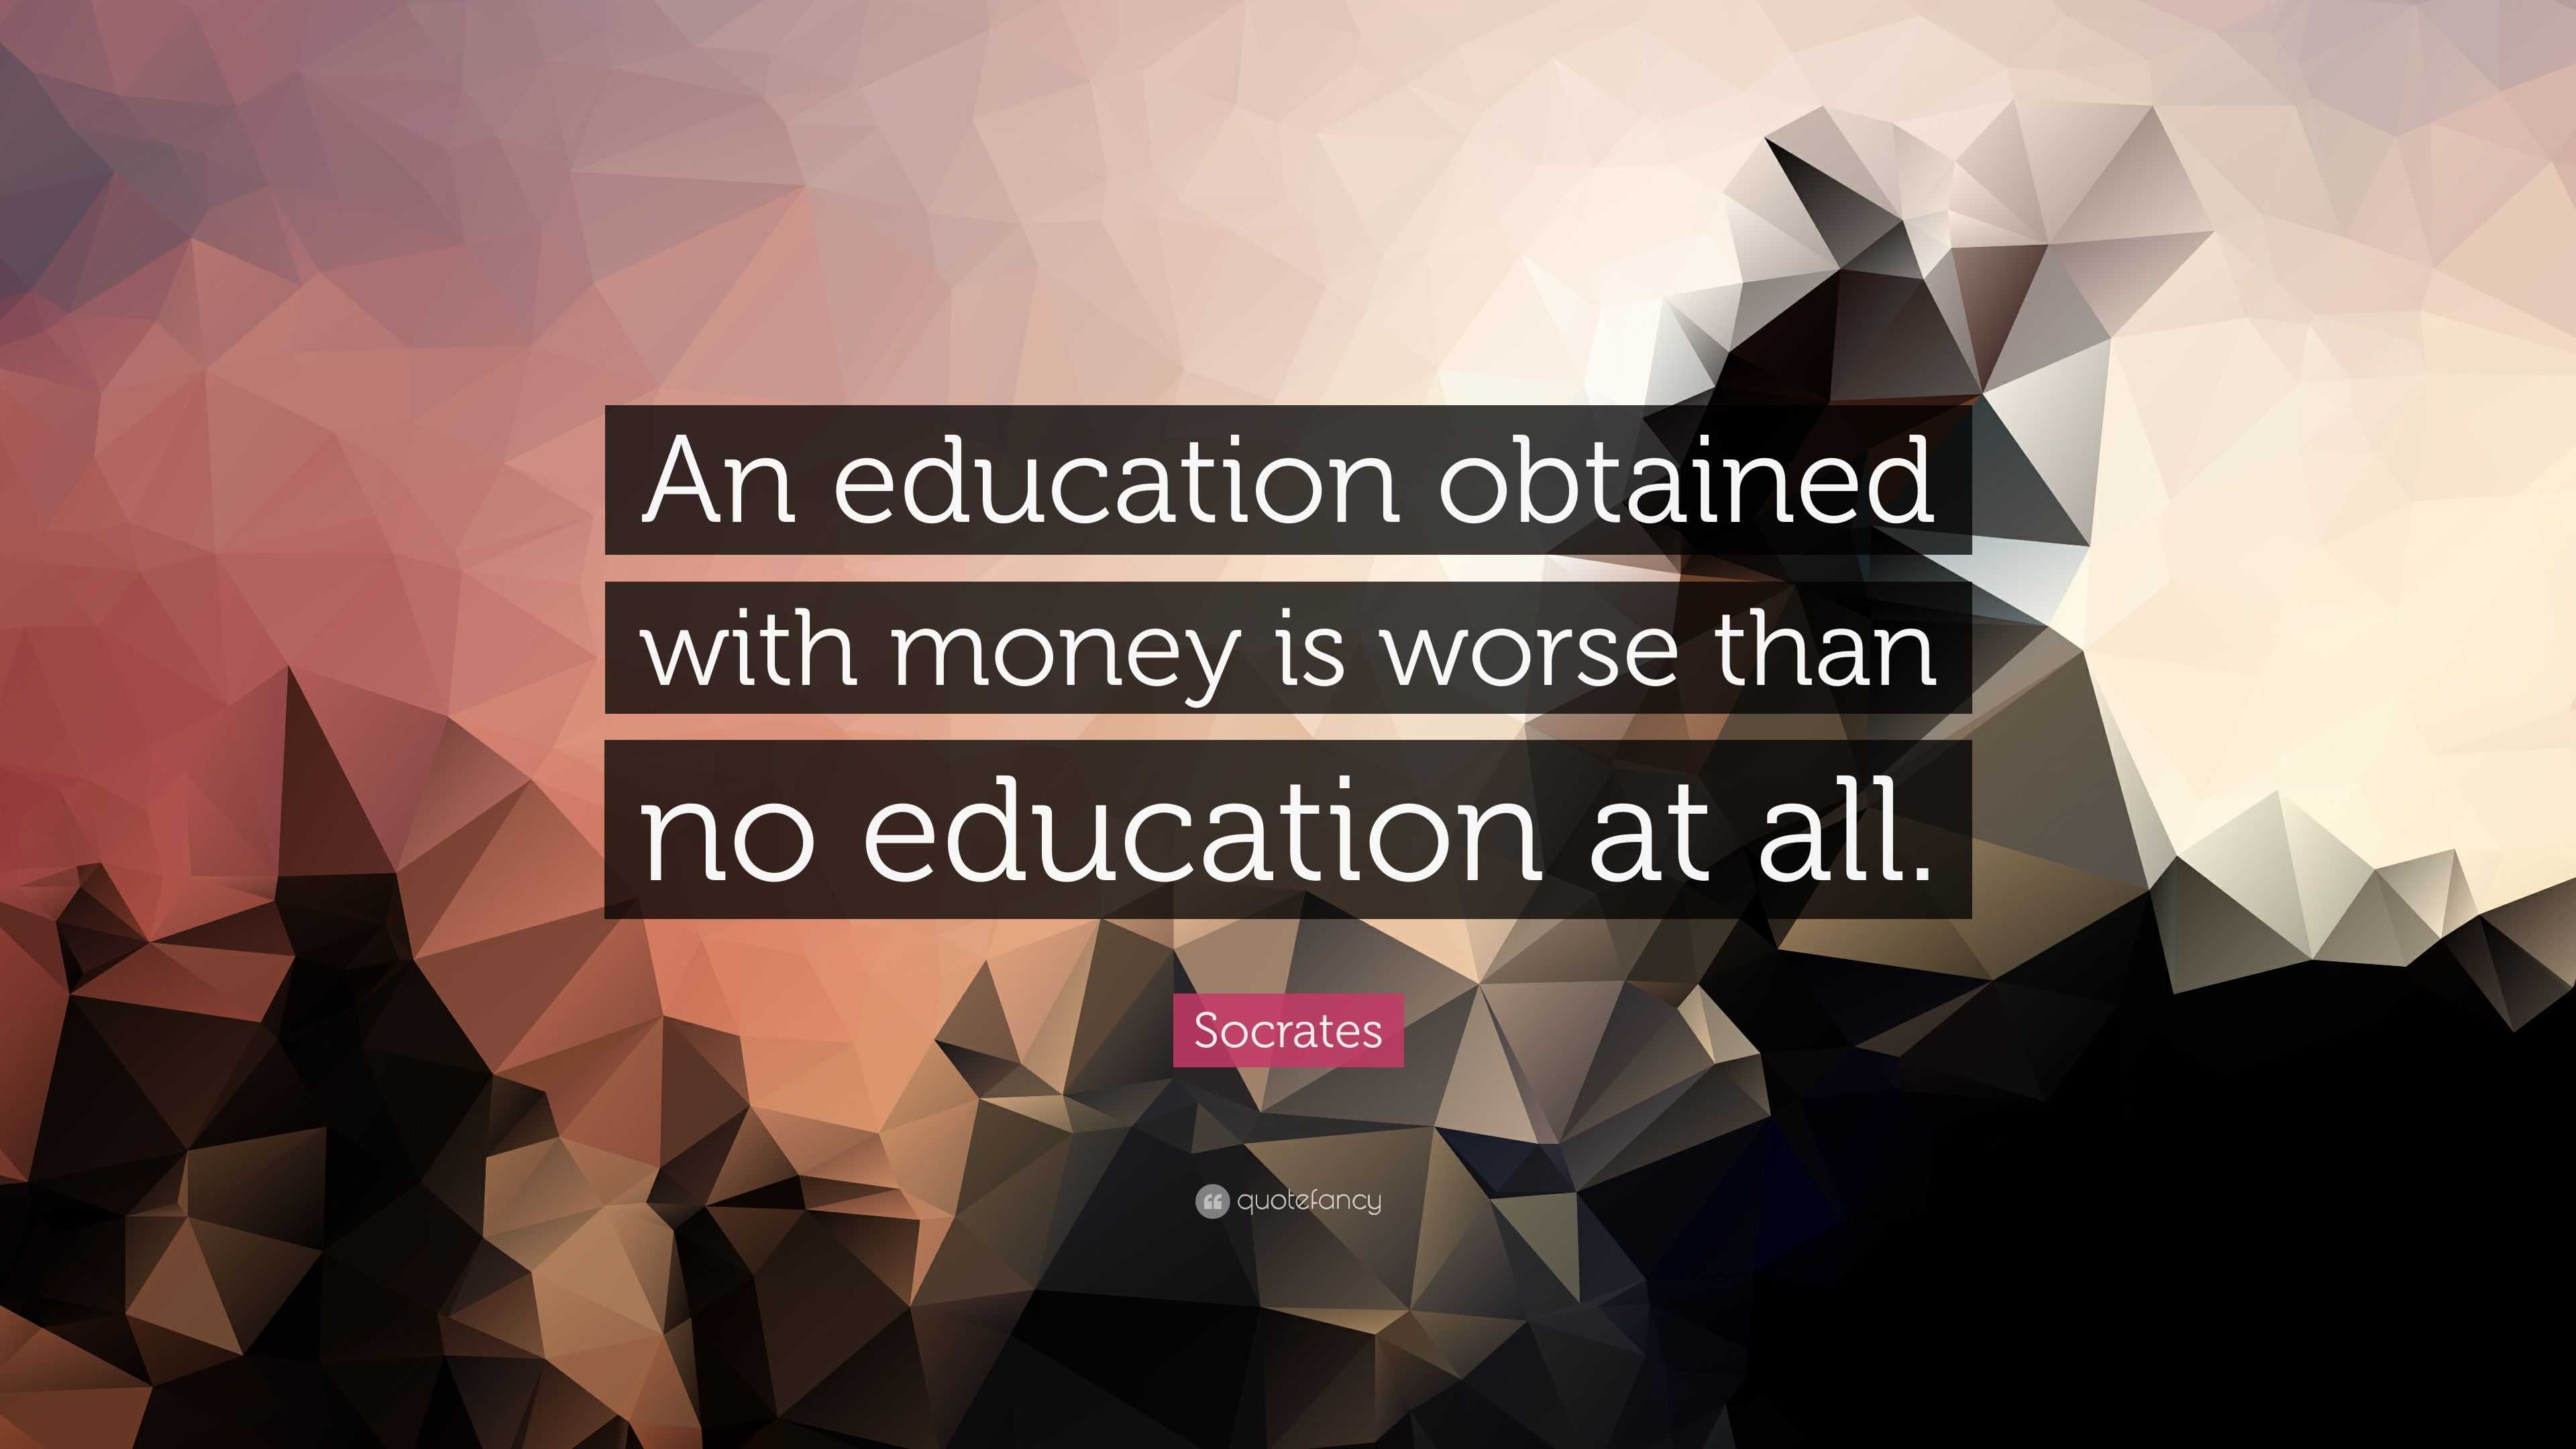 socrates quotes on education